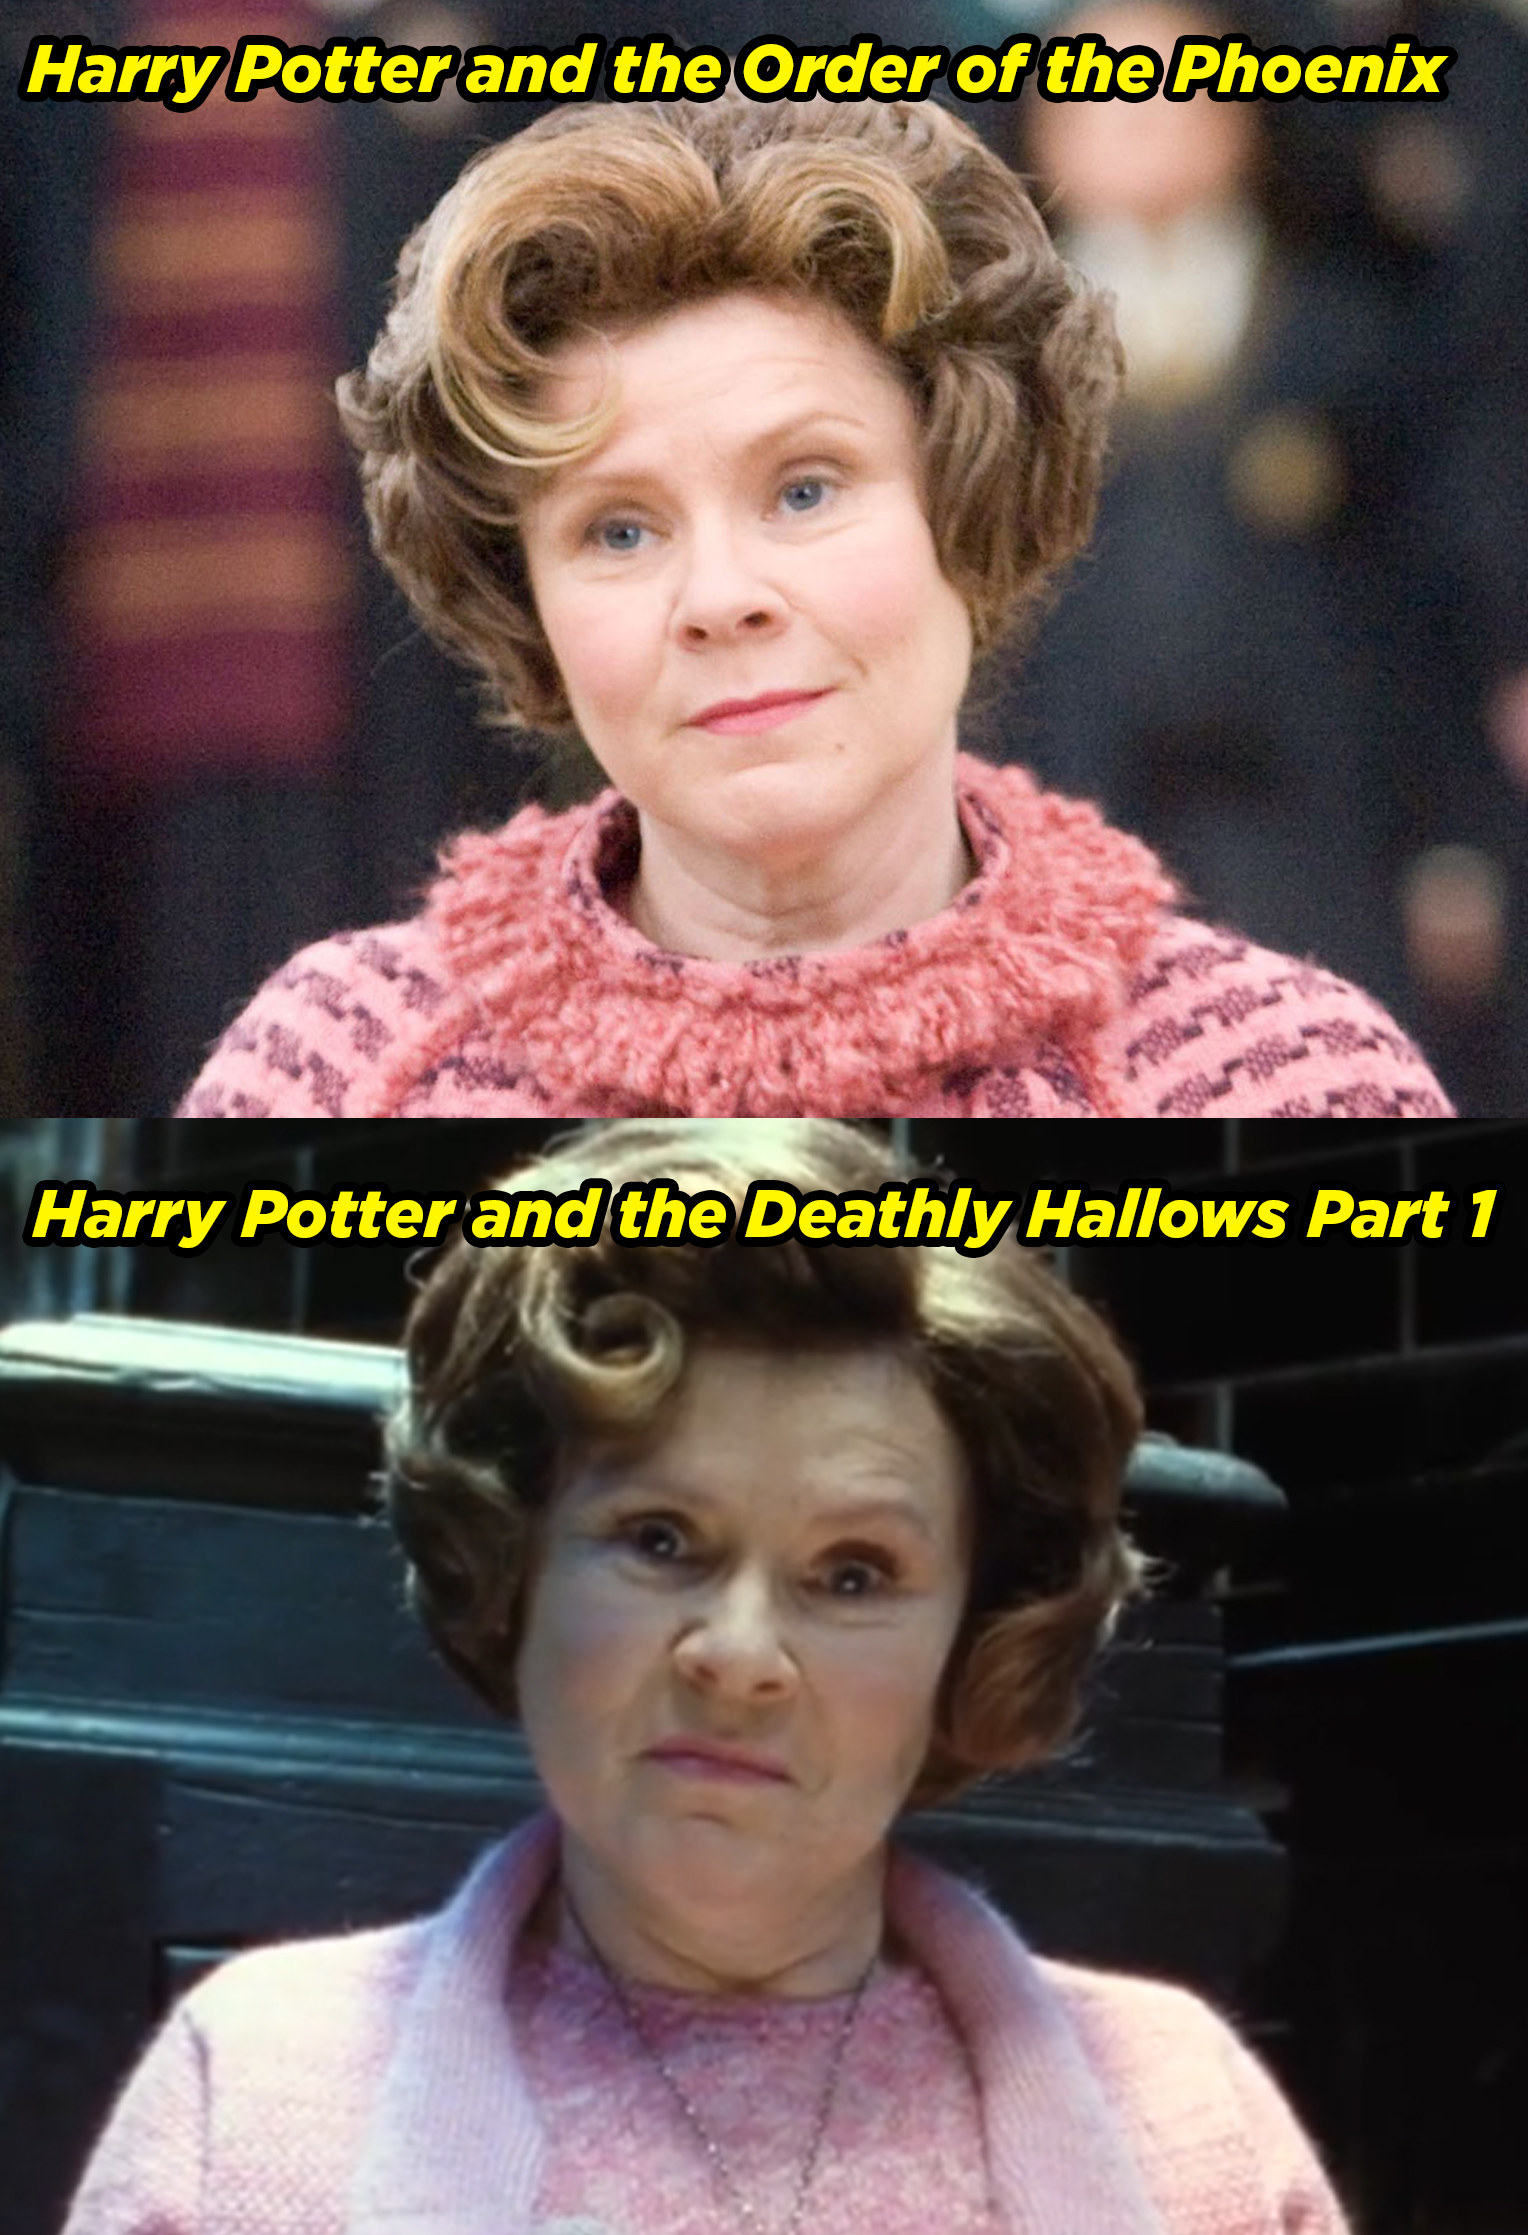 Imelda Staunton in the Order of the Phoenix and Deathly Hallows Part 1